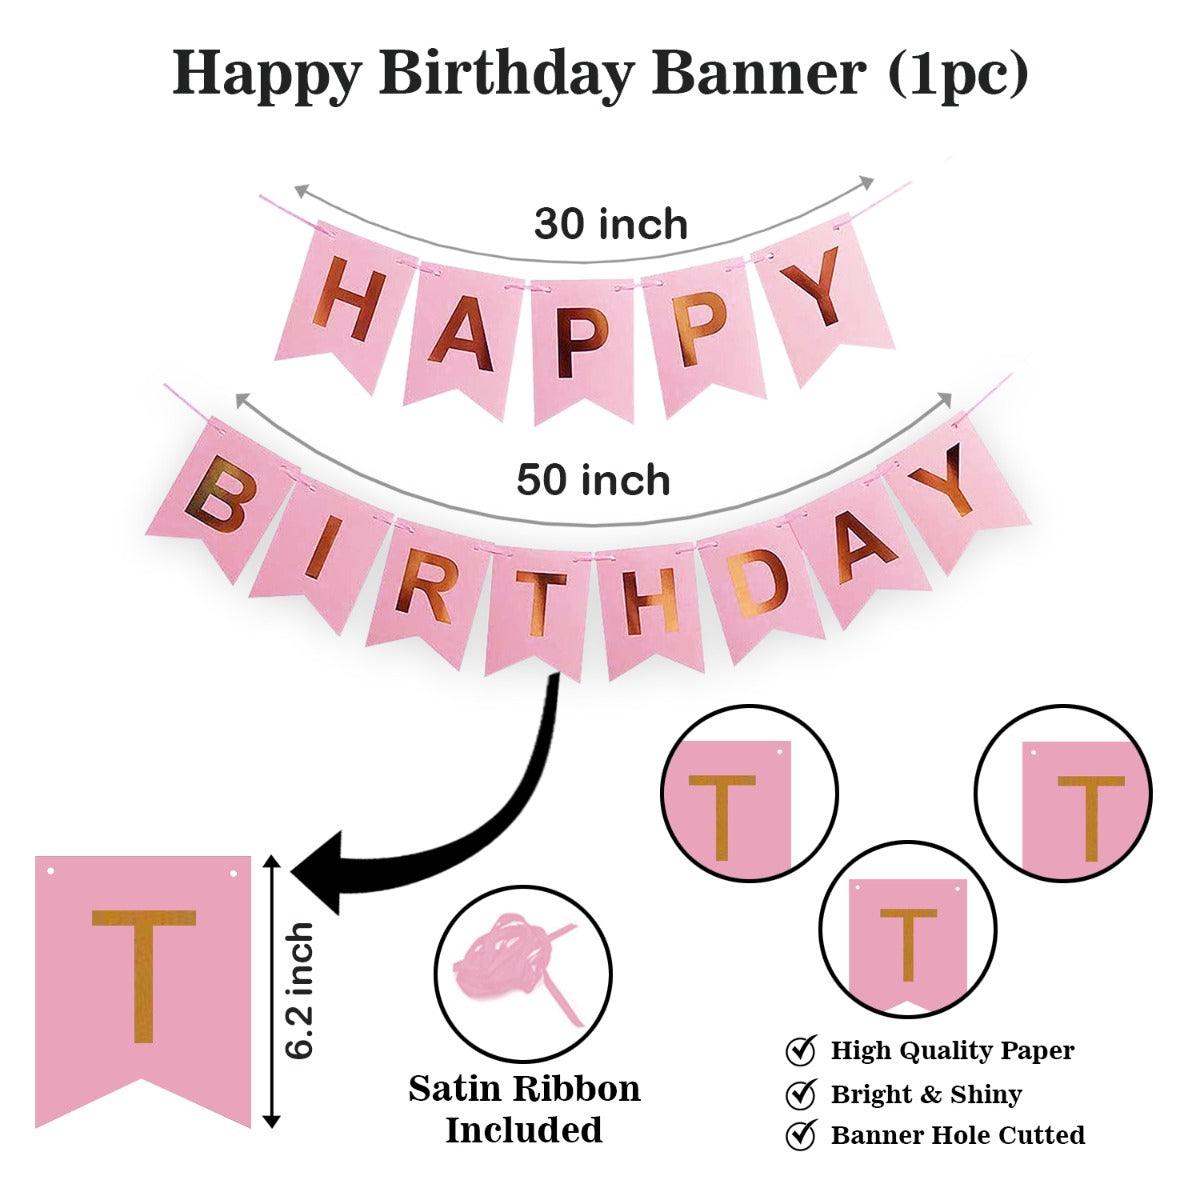 PartyCorp Happy Birthday Decoration Kit Combo 35 Pcs - Pink & Gold Chrome Balloons, Pink & Gold Happy Birthday Banner, Pink Curtain, Moon & Star Foil Balloon Bouquet